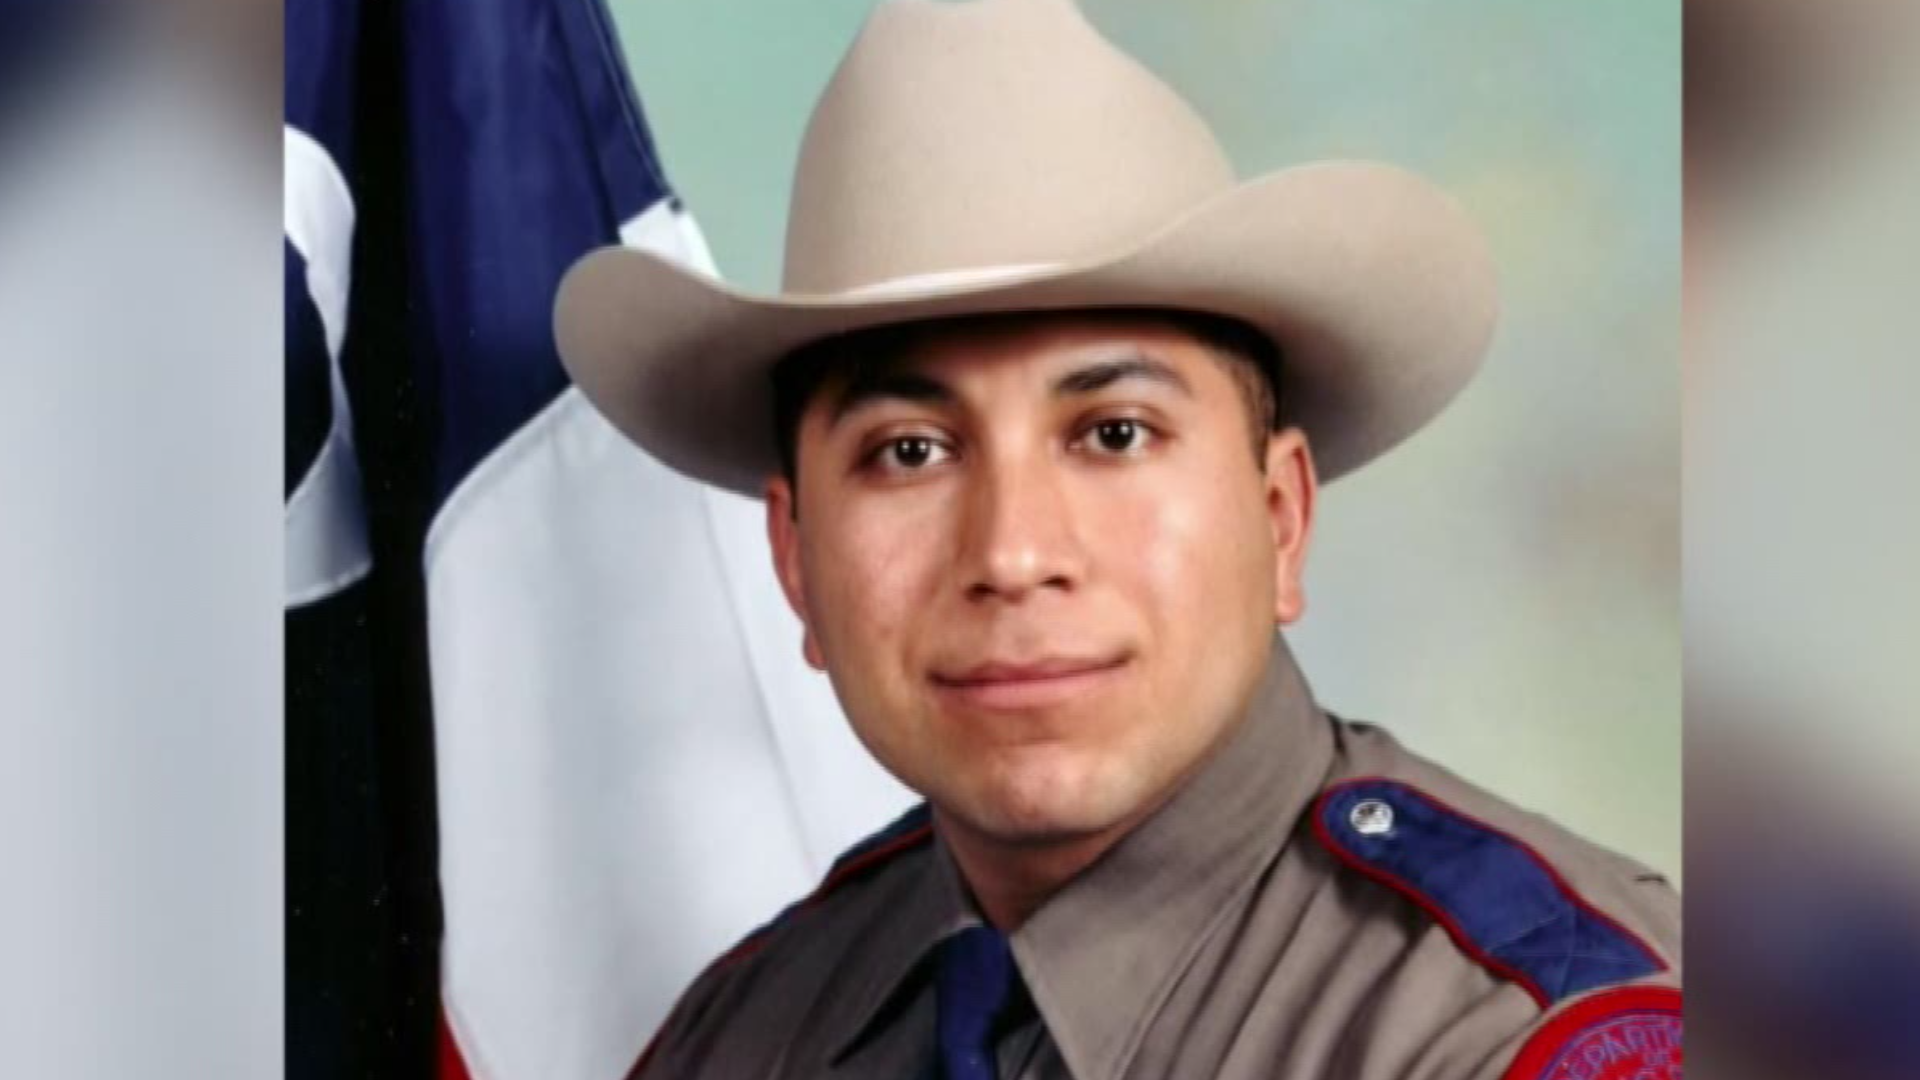 He filed a lawsuit against the state three years ago, claiming he was forced out of his job as a State Trooper because of a lung injury he received serving in Iraq.